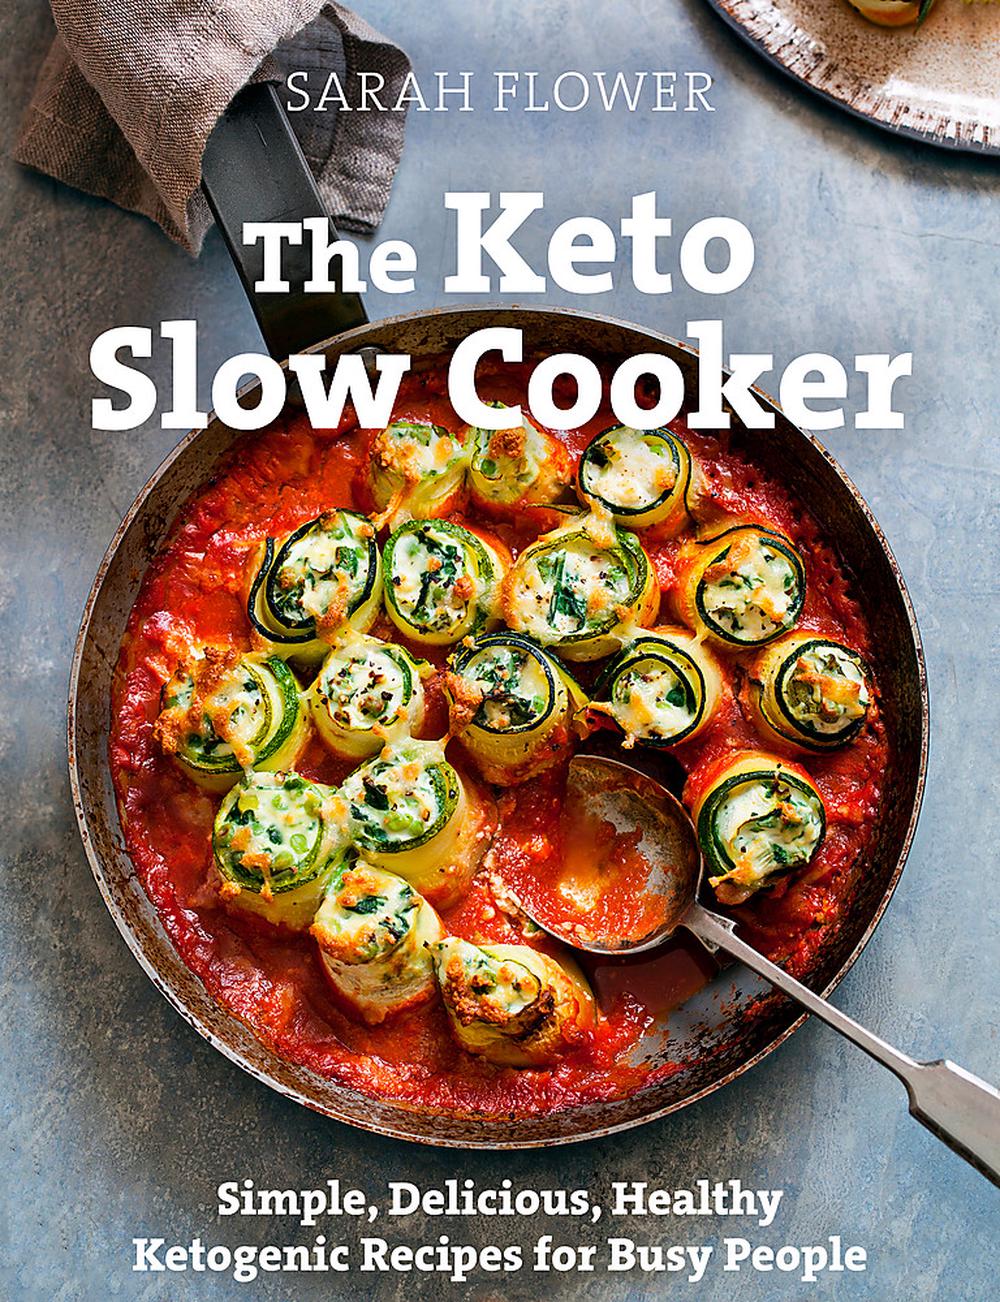 The Keto Slow Cooker by Sarah Flower, Paperback, 9781472144959 | Buy ...